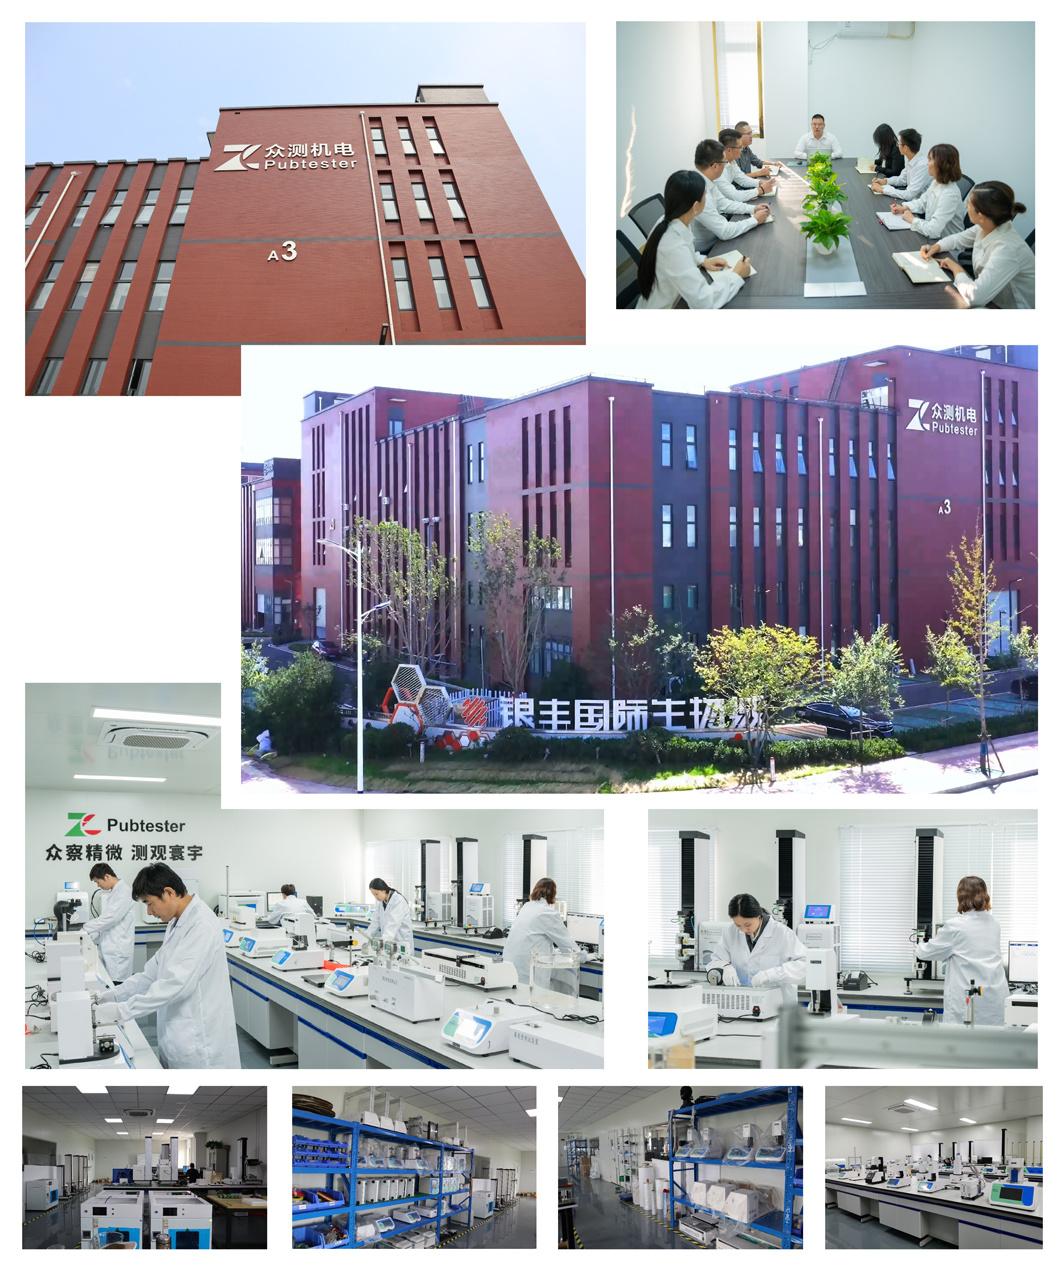 YY/T1554 Medical Devices Materials Interventional Guide Wire Catheters Tips Flexibility Tester China Factory